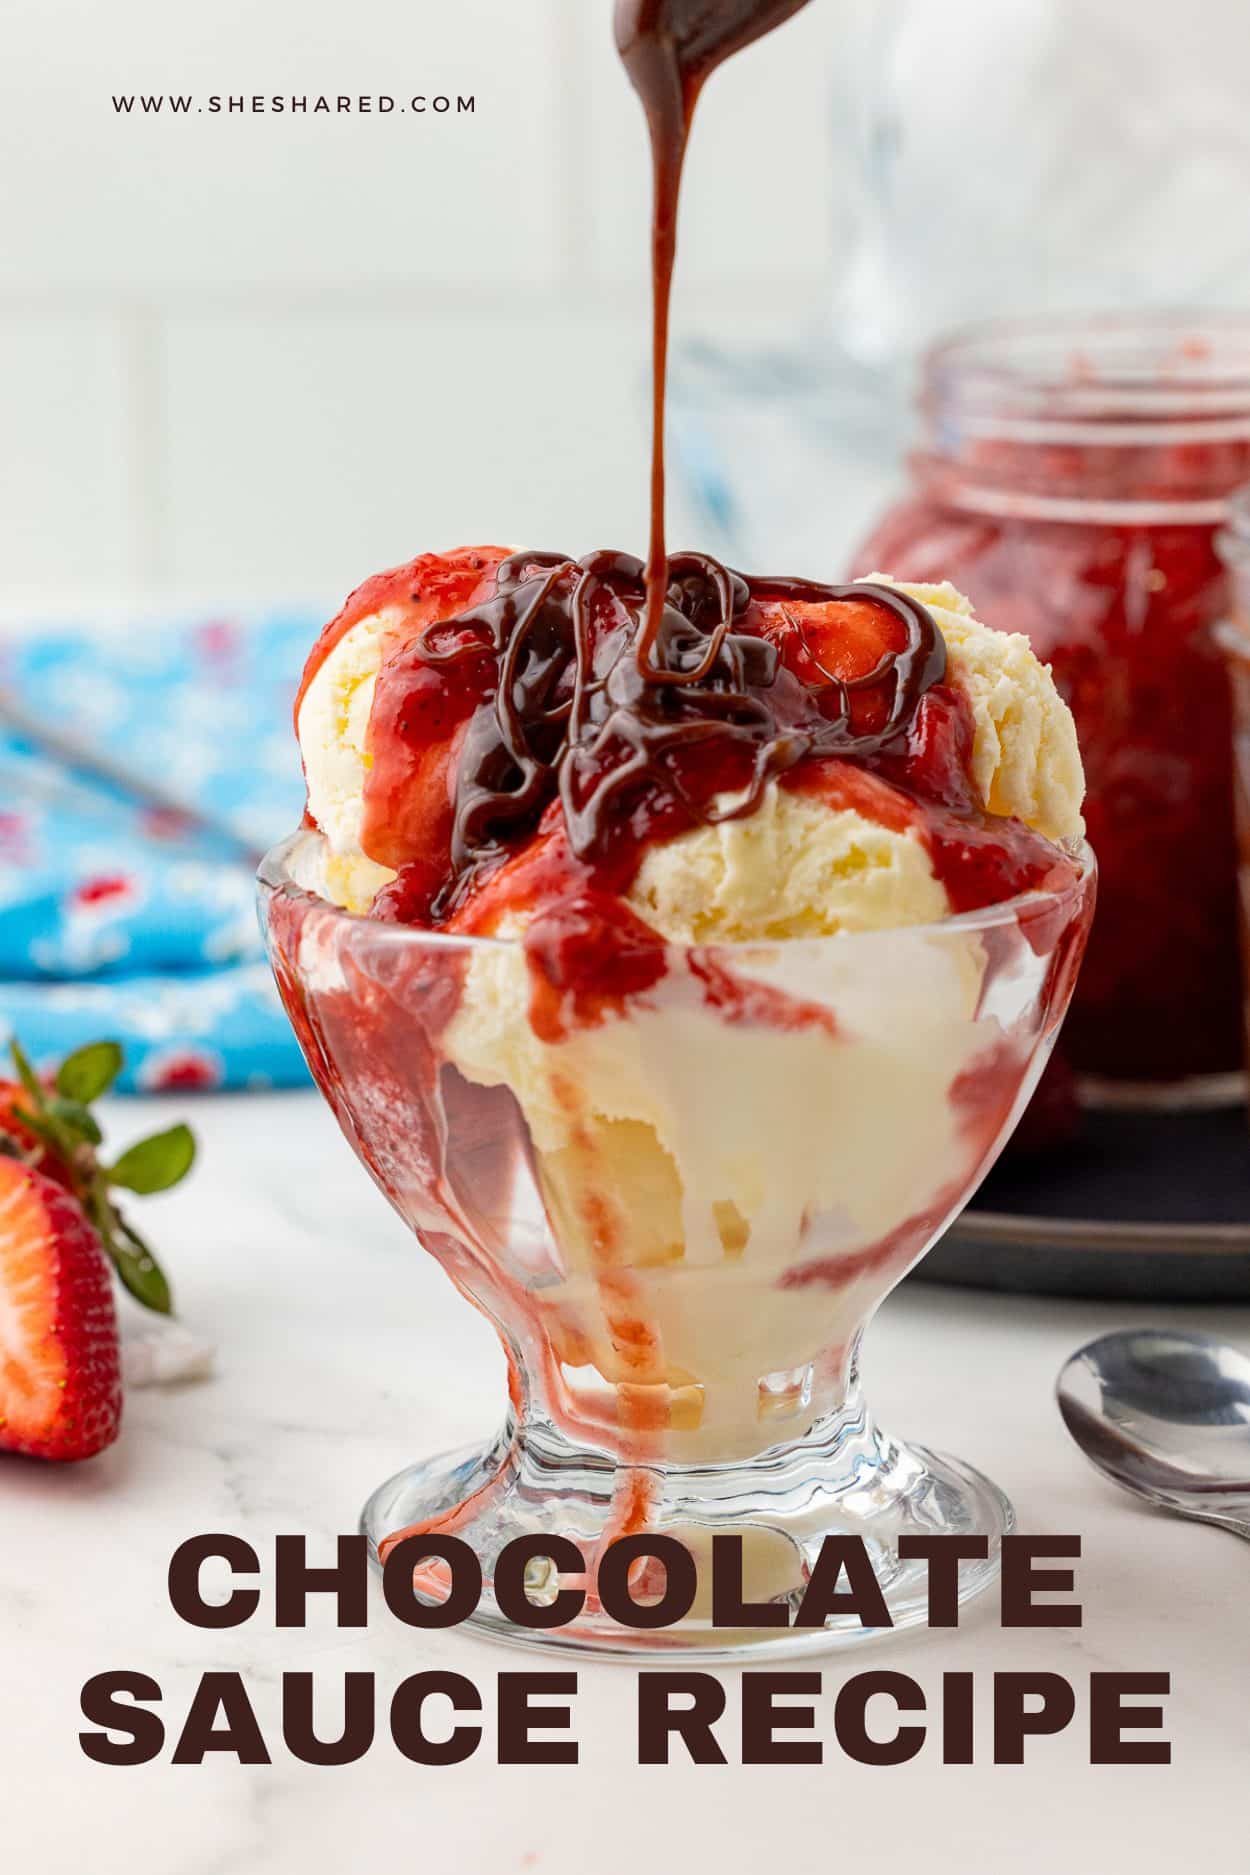 ice cream in a sundae cup topped with strawberry compote and chocolate sauce, with a blue napkin in the background